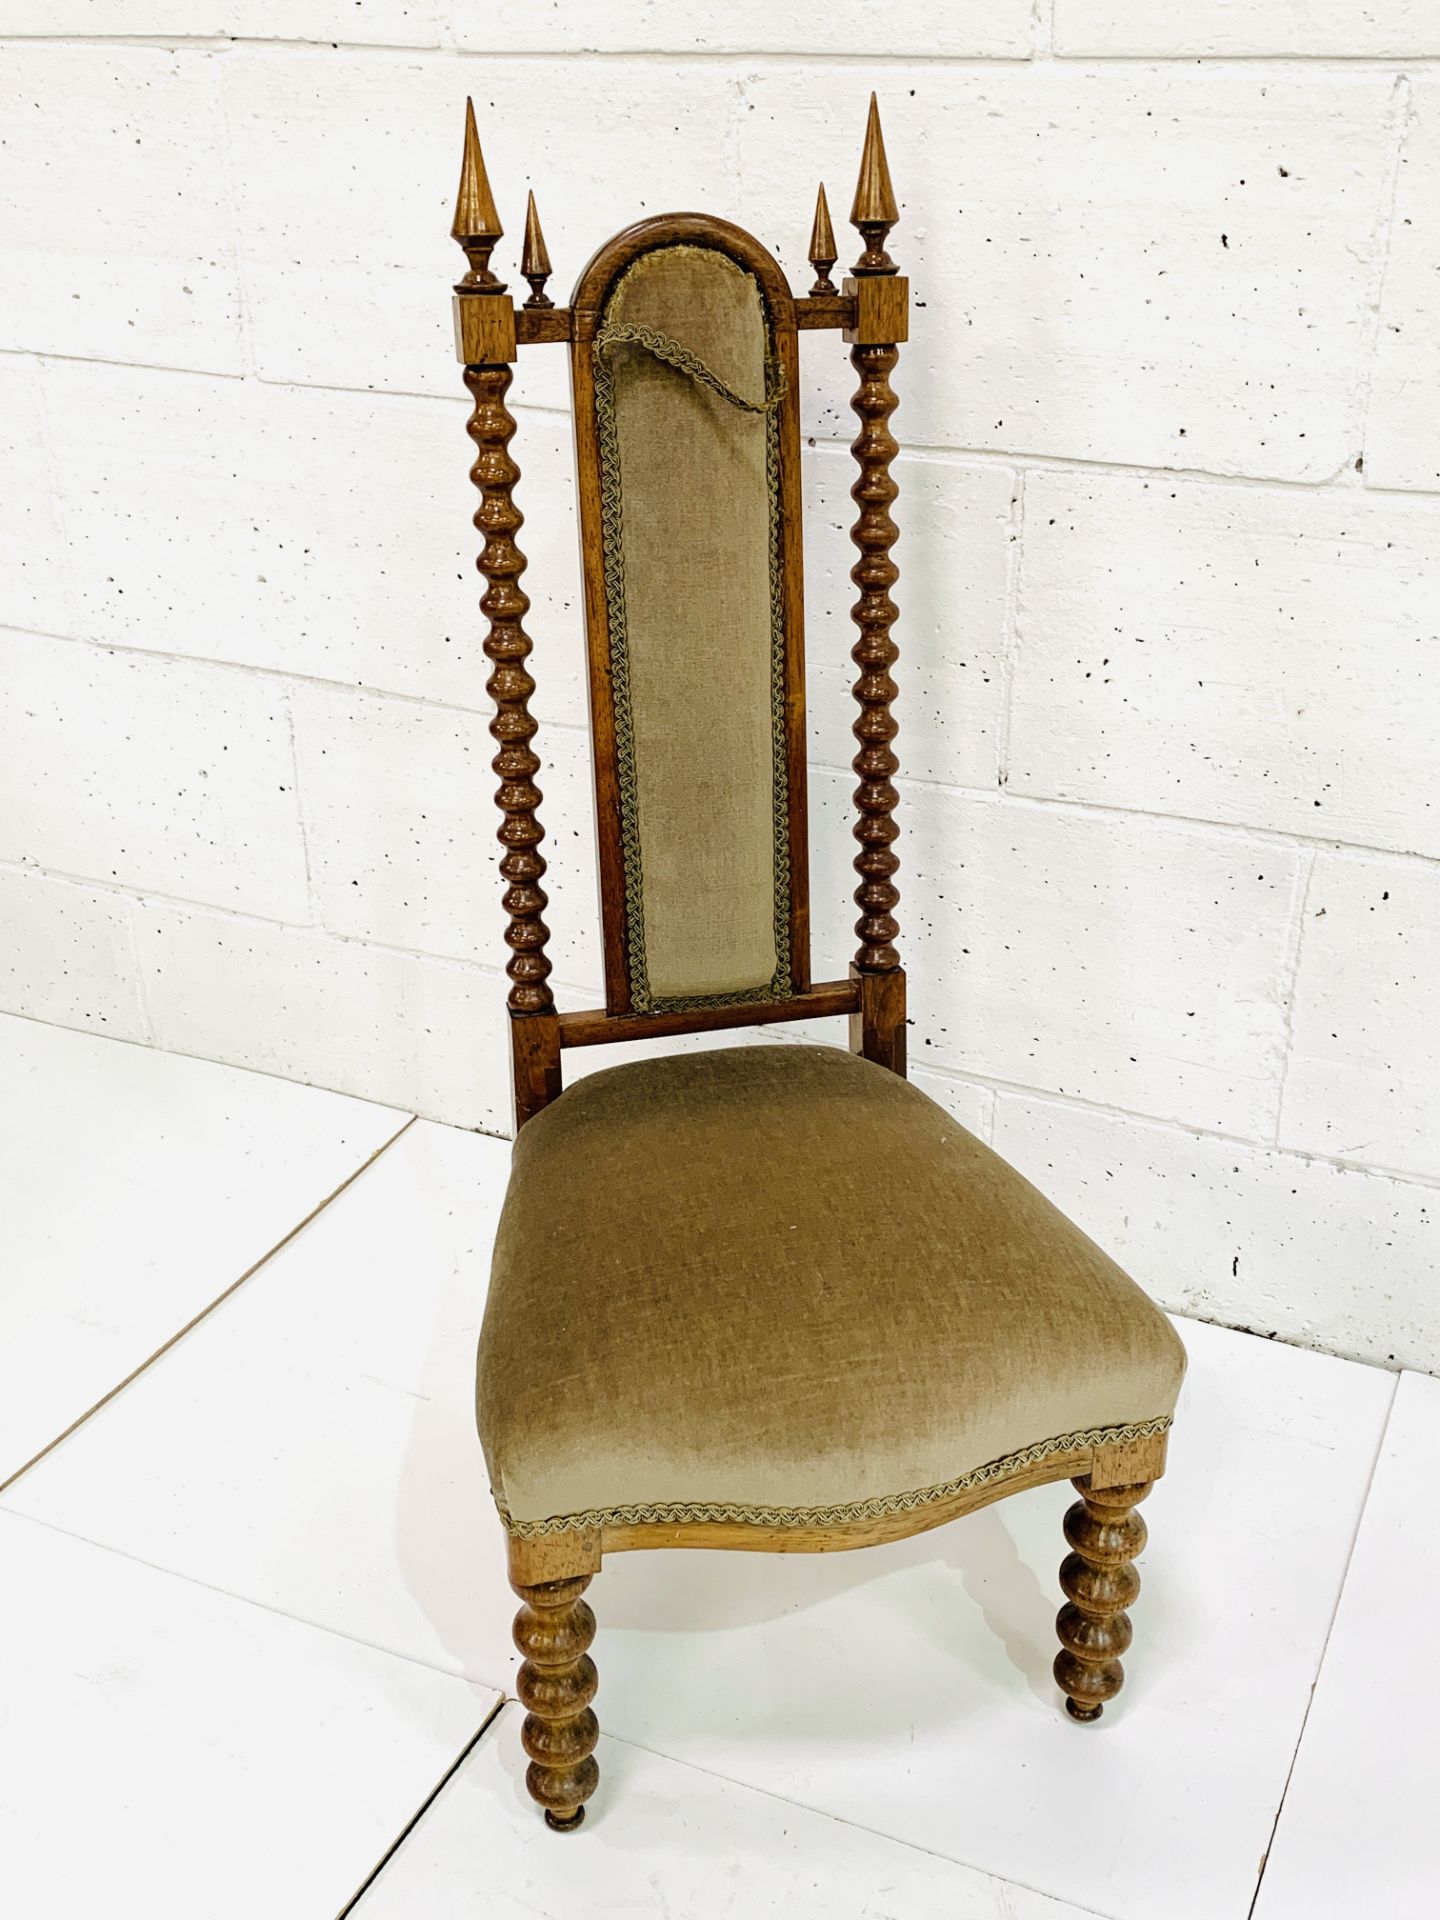 Upholstered decorative hall chair